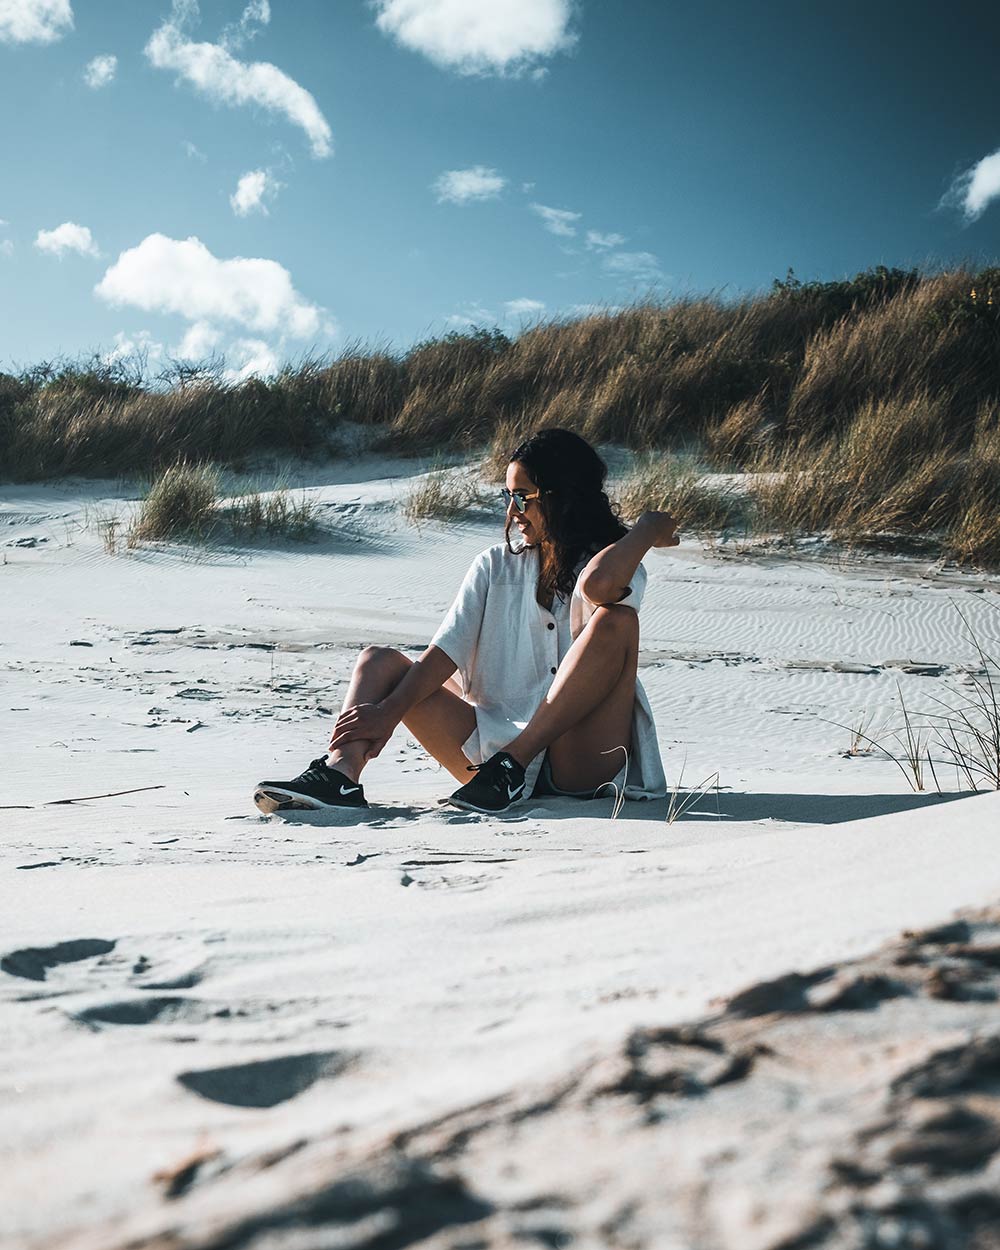 A woman sits on the sand of a beach with grassy hills and a beautiful blue sky behind her. This image has been edited using the Added Blues preset which is included as part of the moody Lightroom presets package.